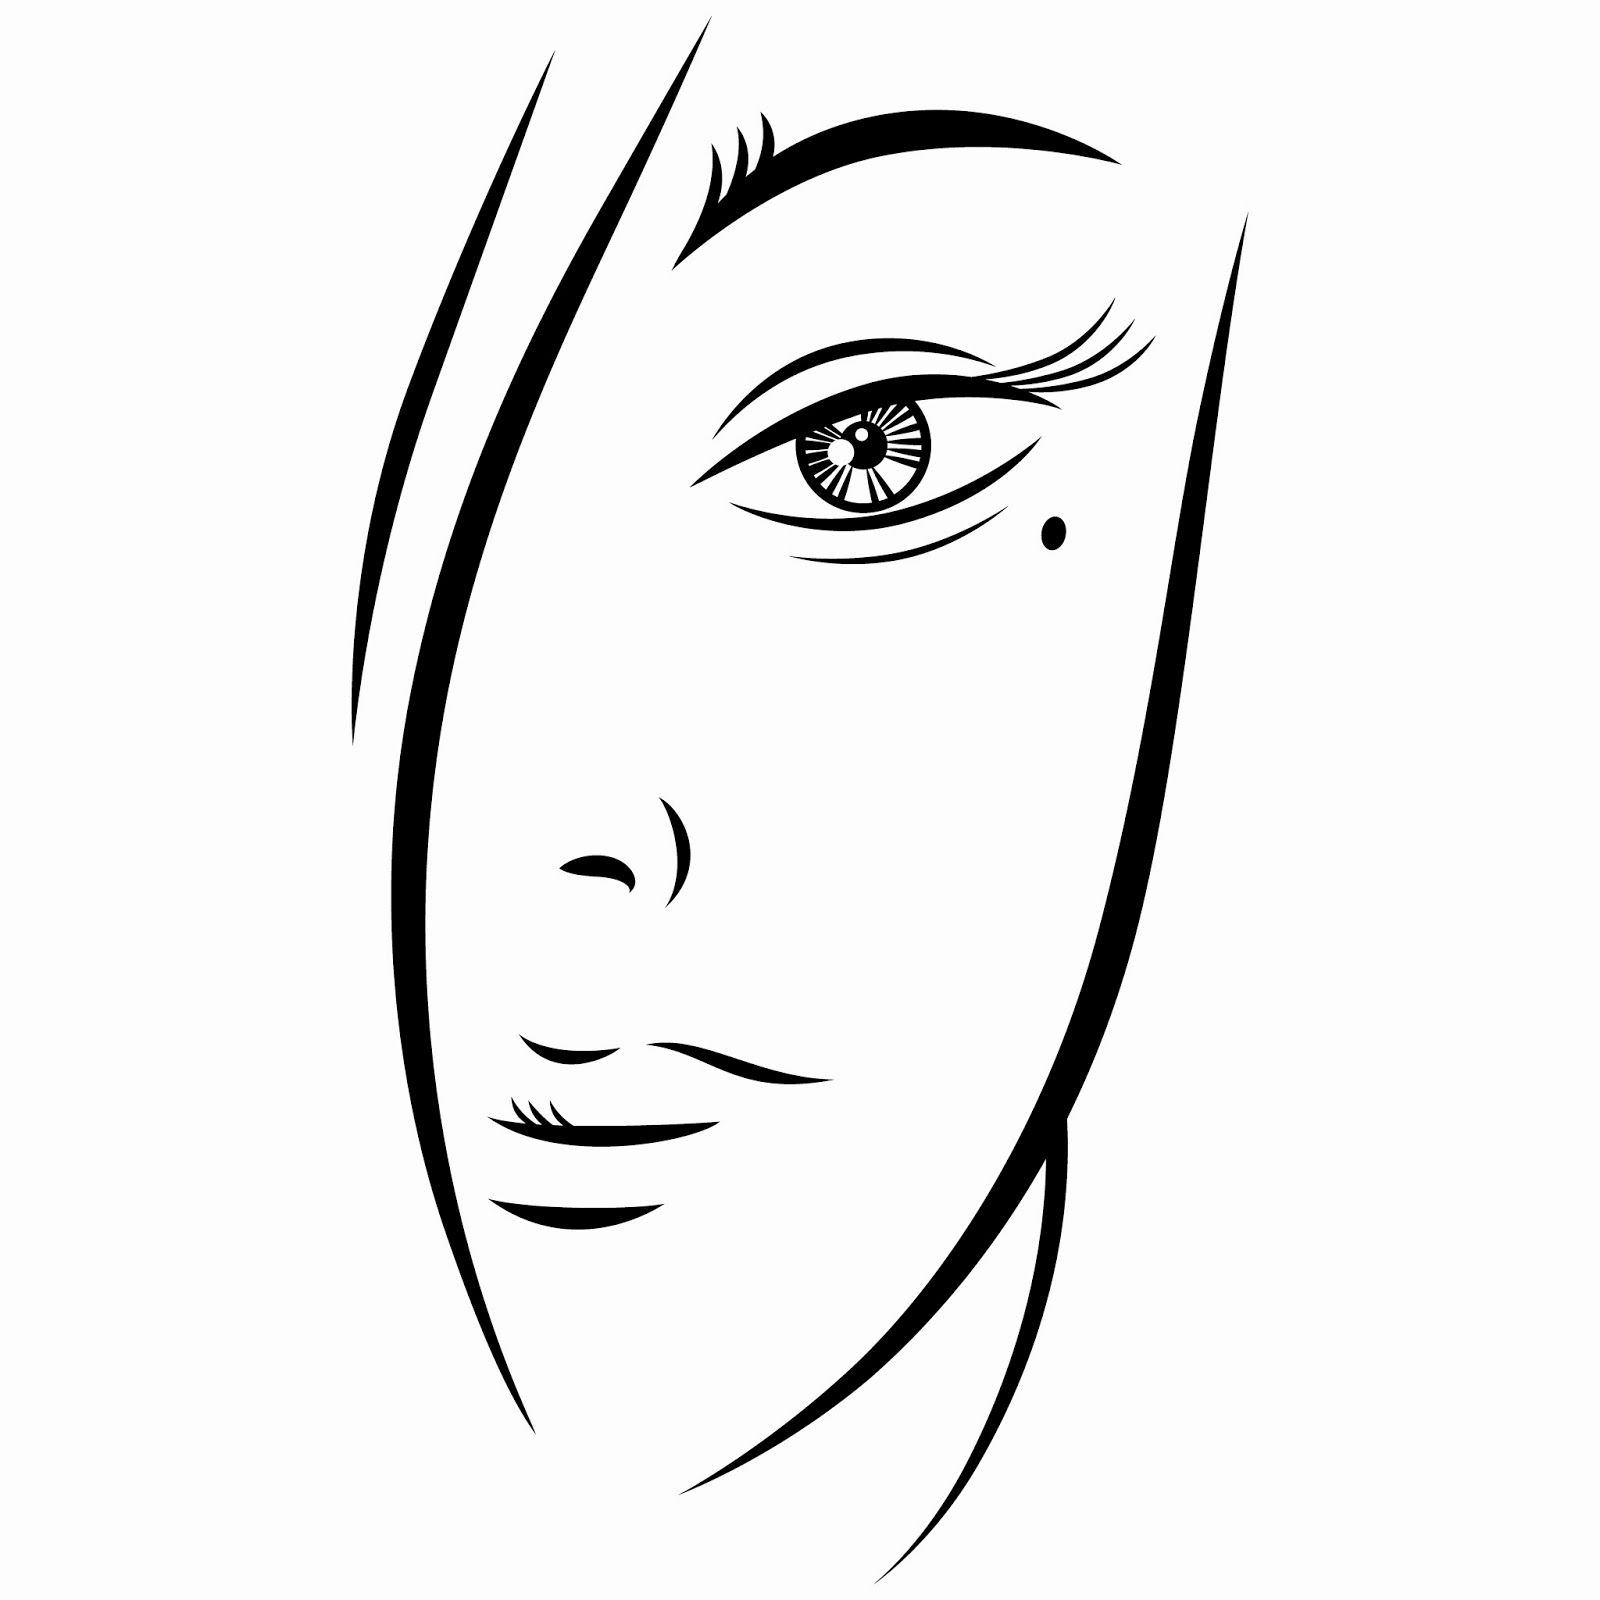 Download Free EPS Vector Illustration: Ink sketch of young woman ...